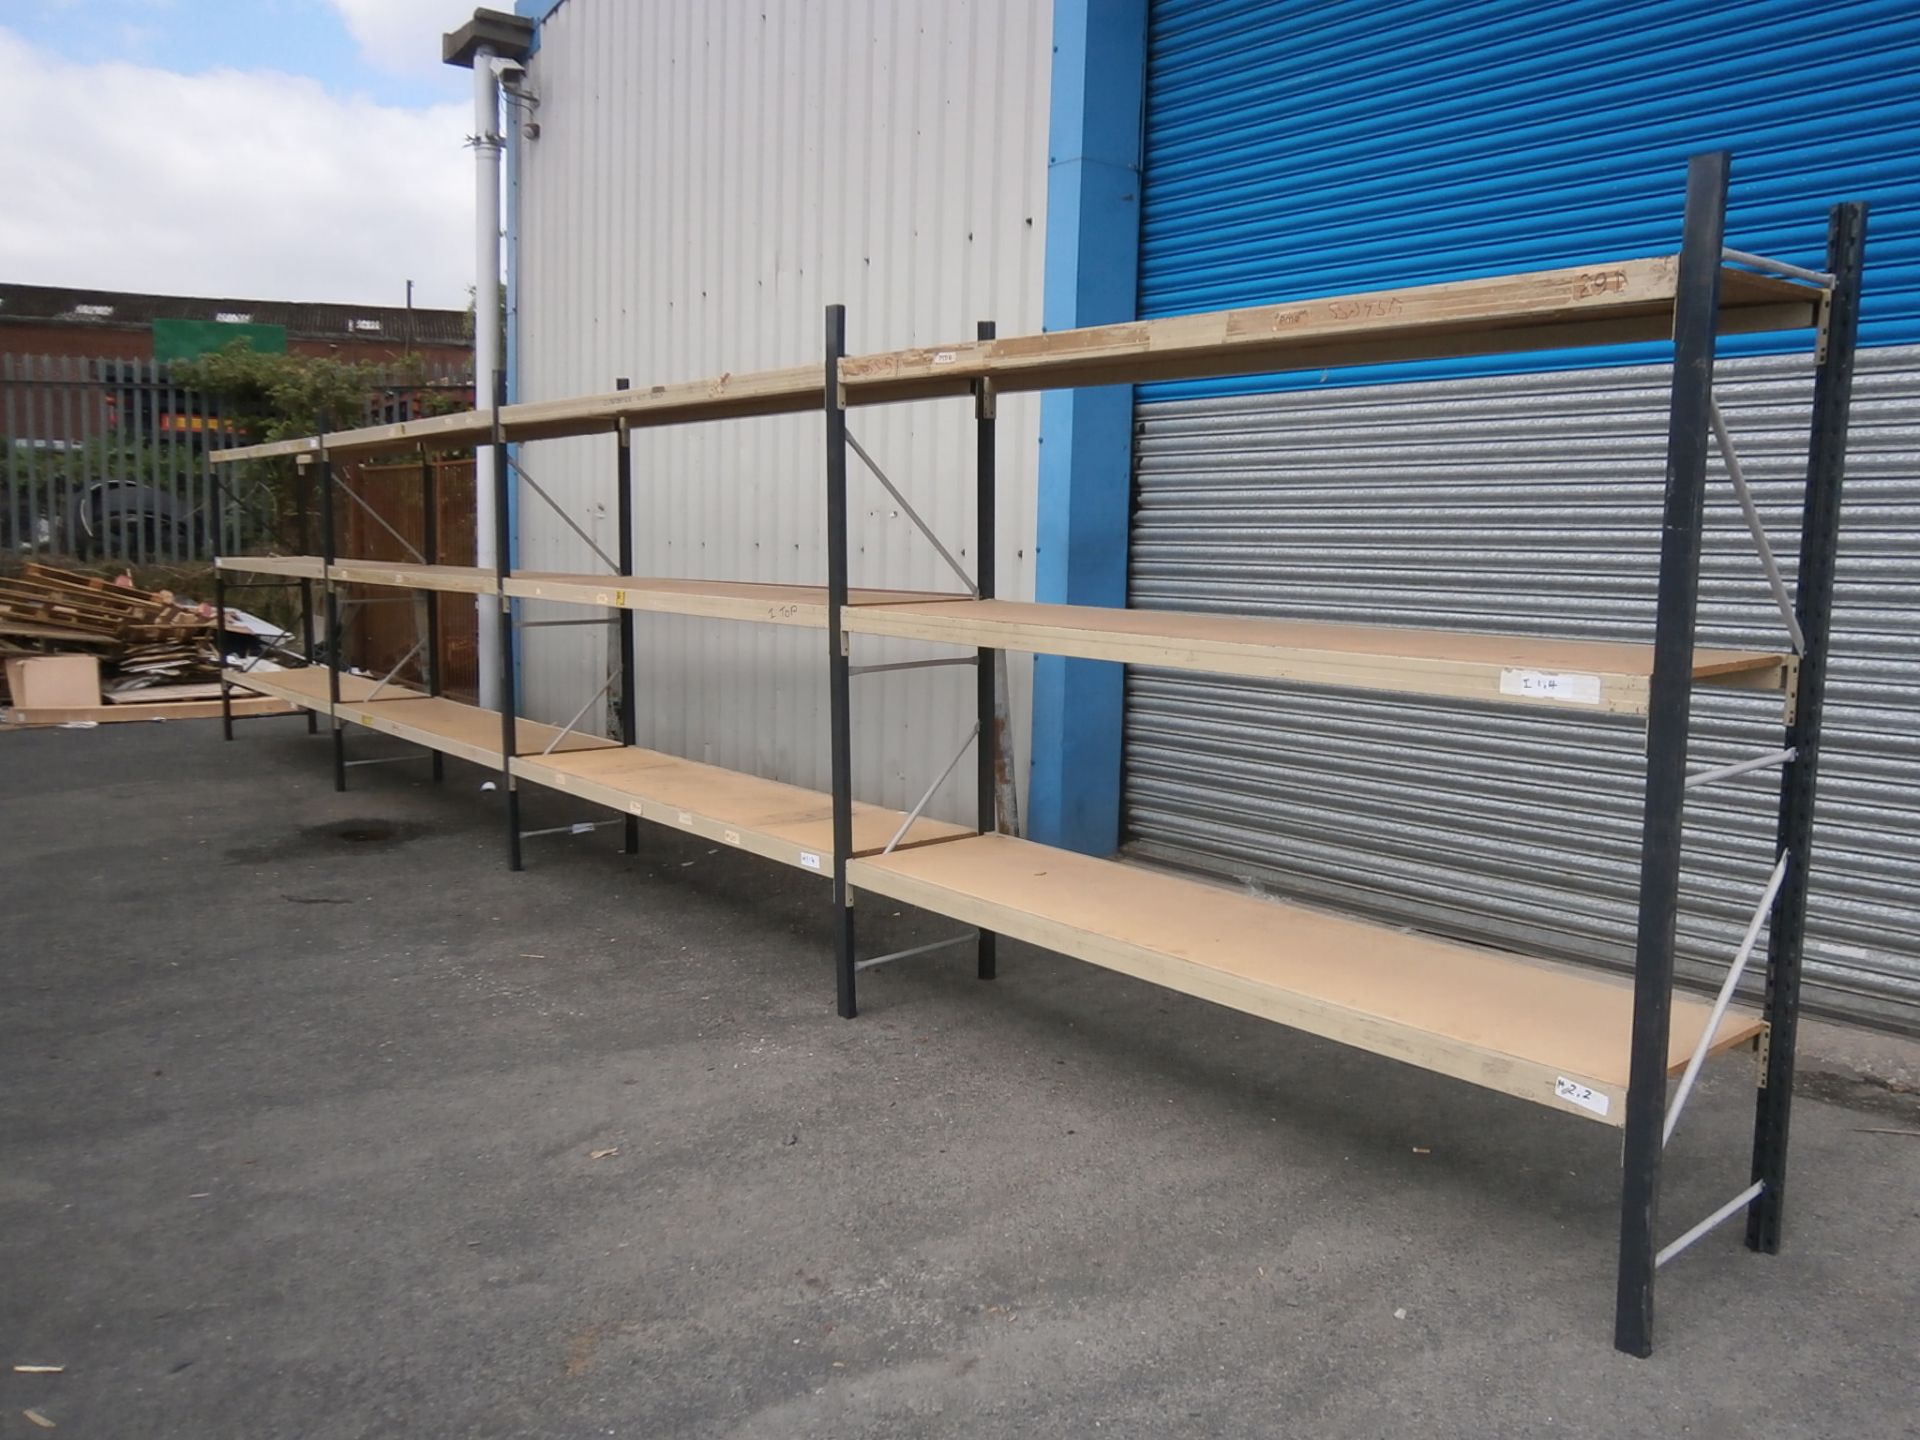 4 x Bays of Commercial Racking - Includes 5 x Uprights, 24 x Beams and 12 x Boards (H - 2100mm, - Image 2 of 4